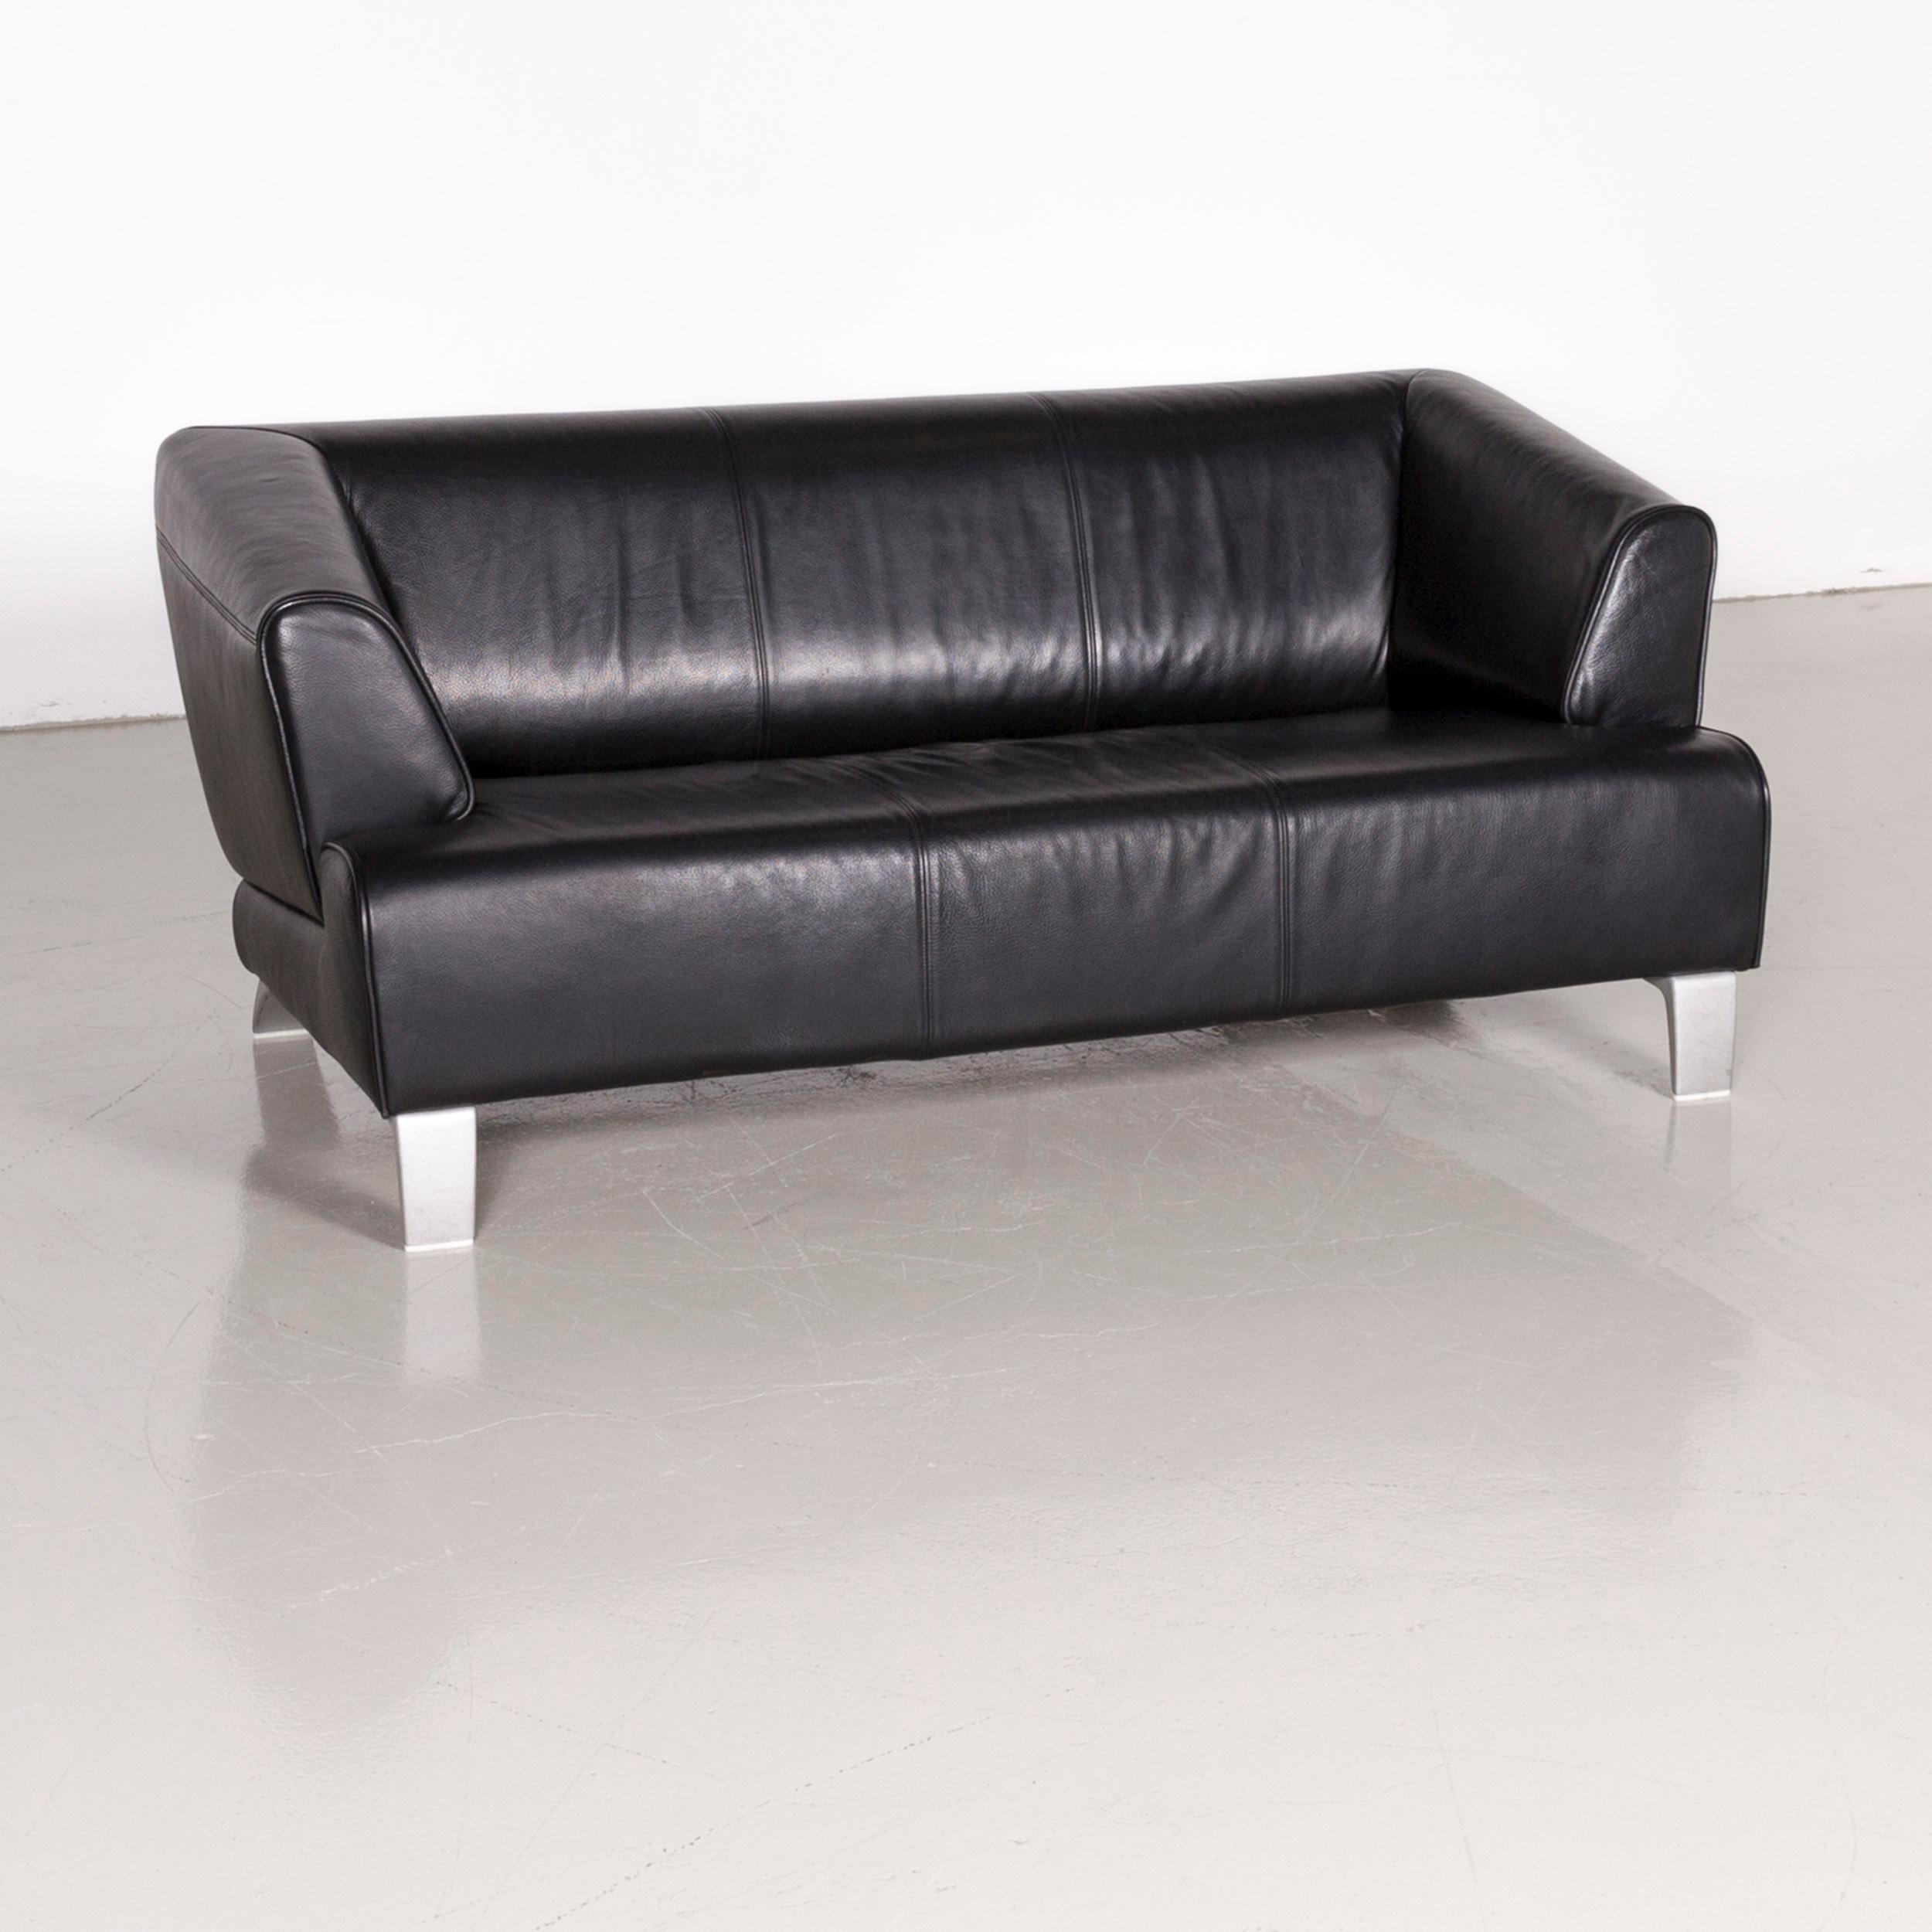 Modern Rolf Benz 2300 Designer Sofa Black Two-Seat Leather Couch